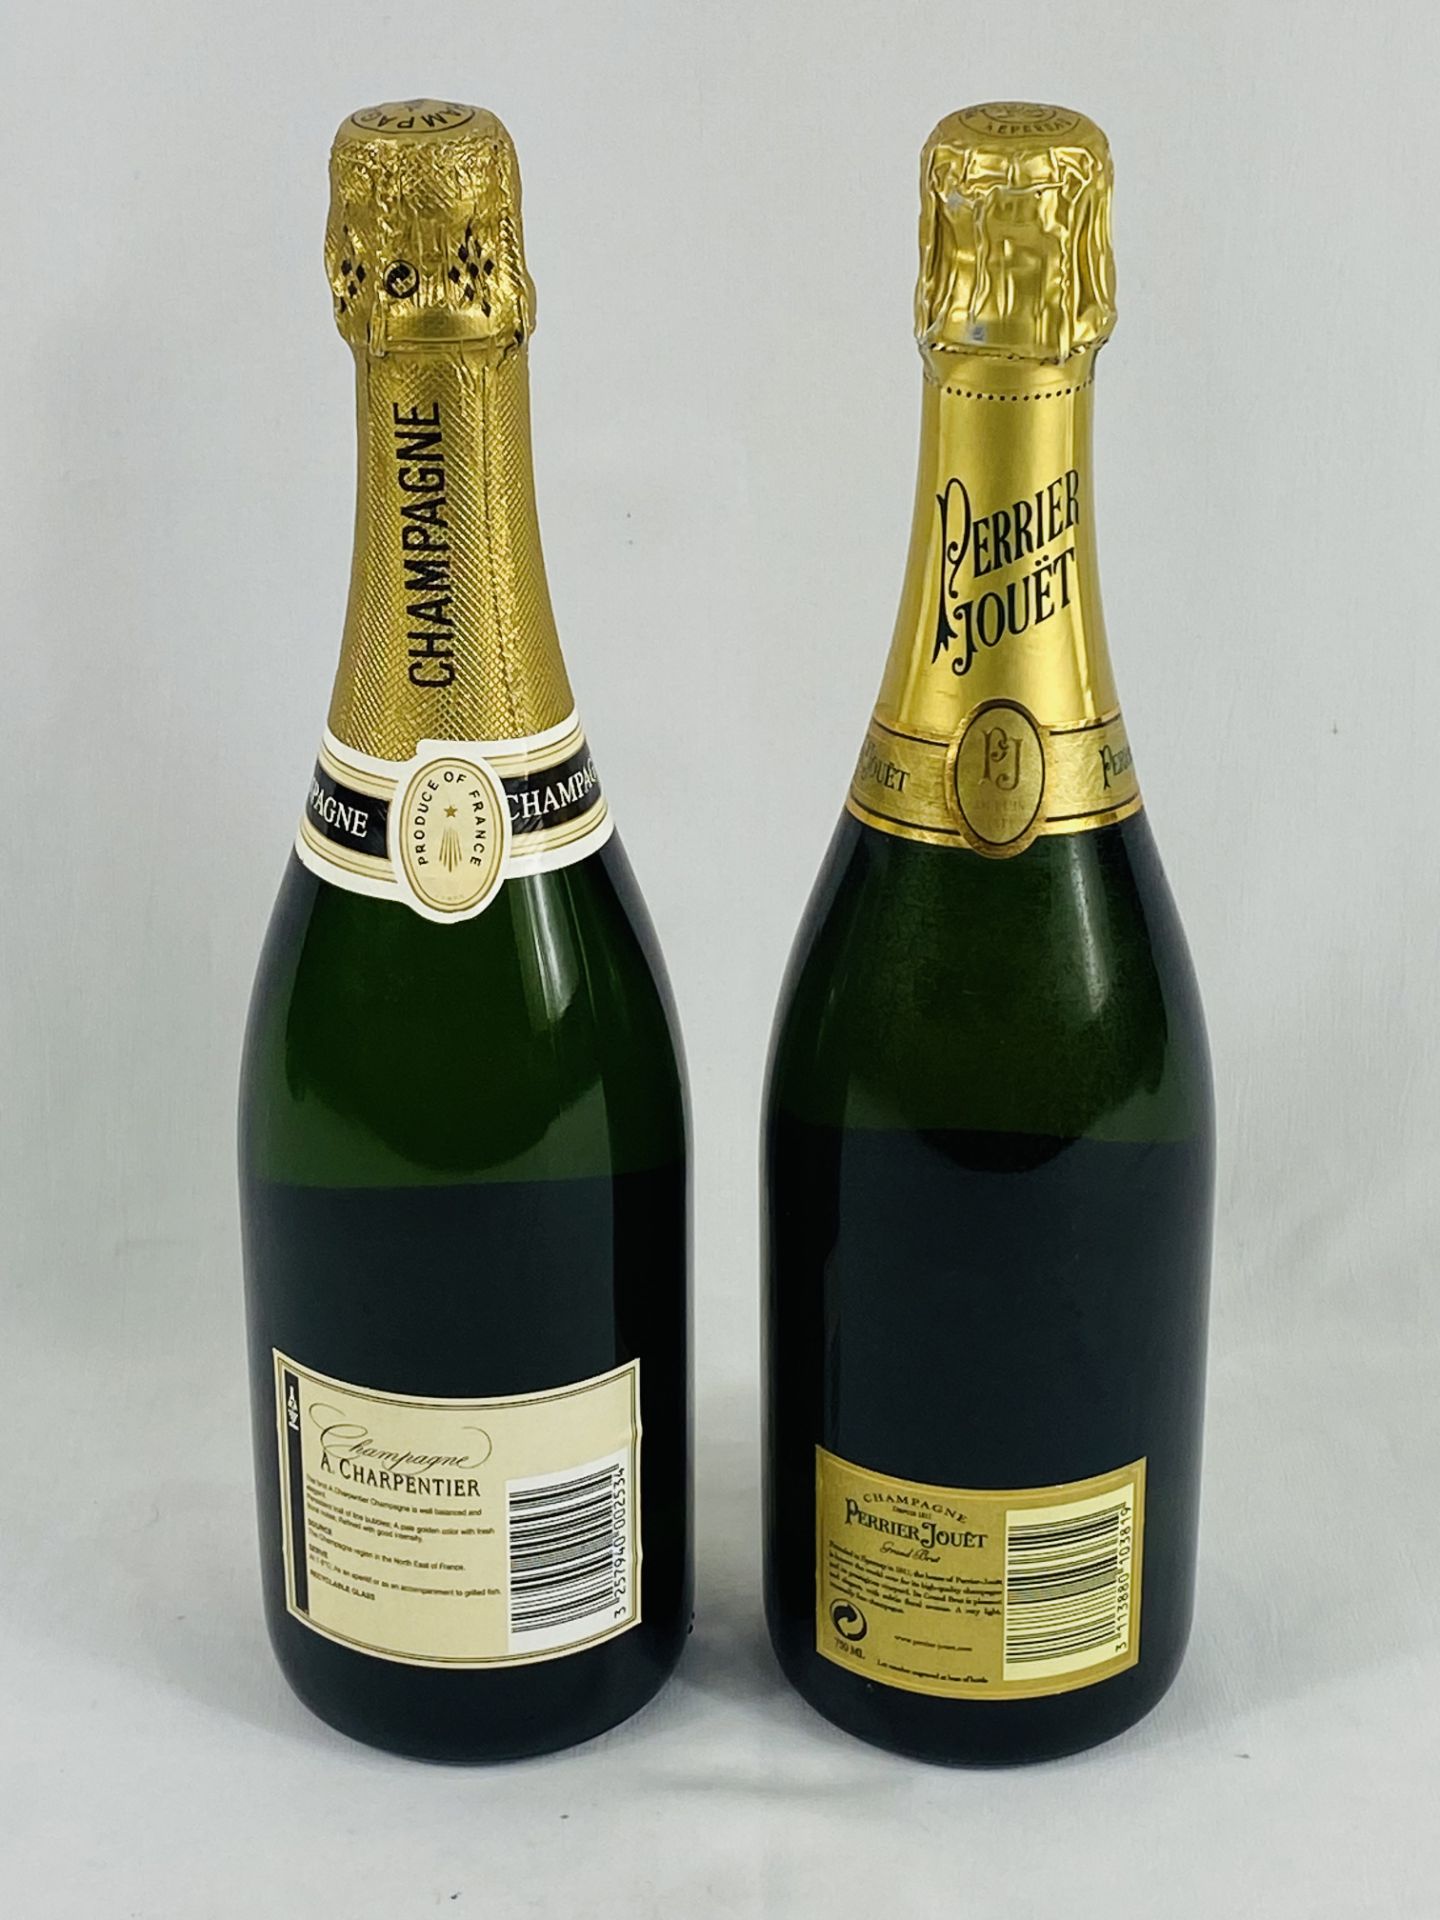 Bottle of Perrier Jouet Champagne; together with a bottle of Charpentier Tradition Brut. - Bild 2 aus 2